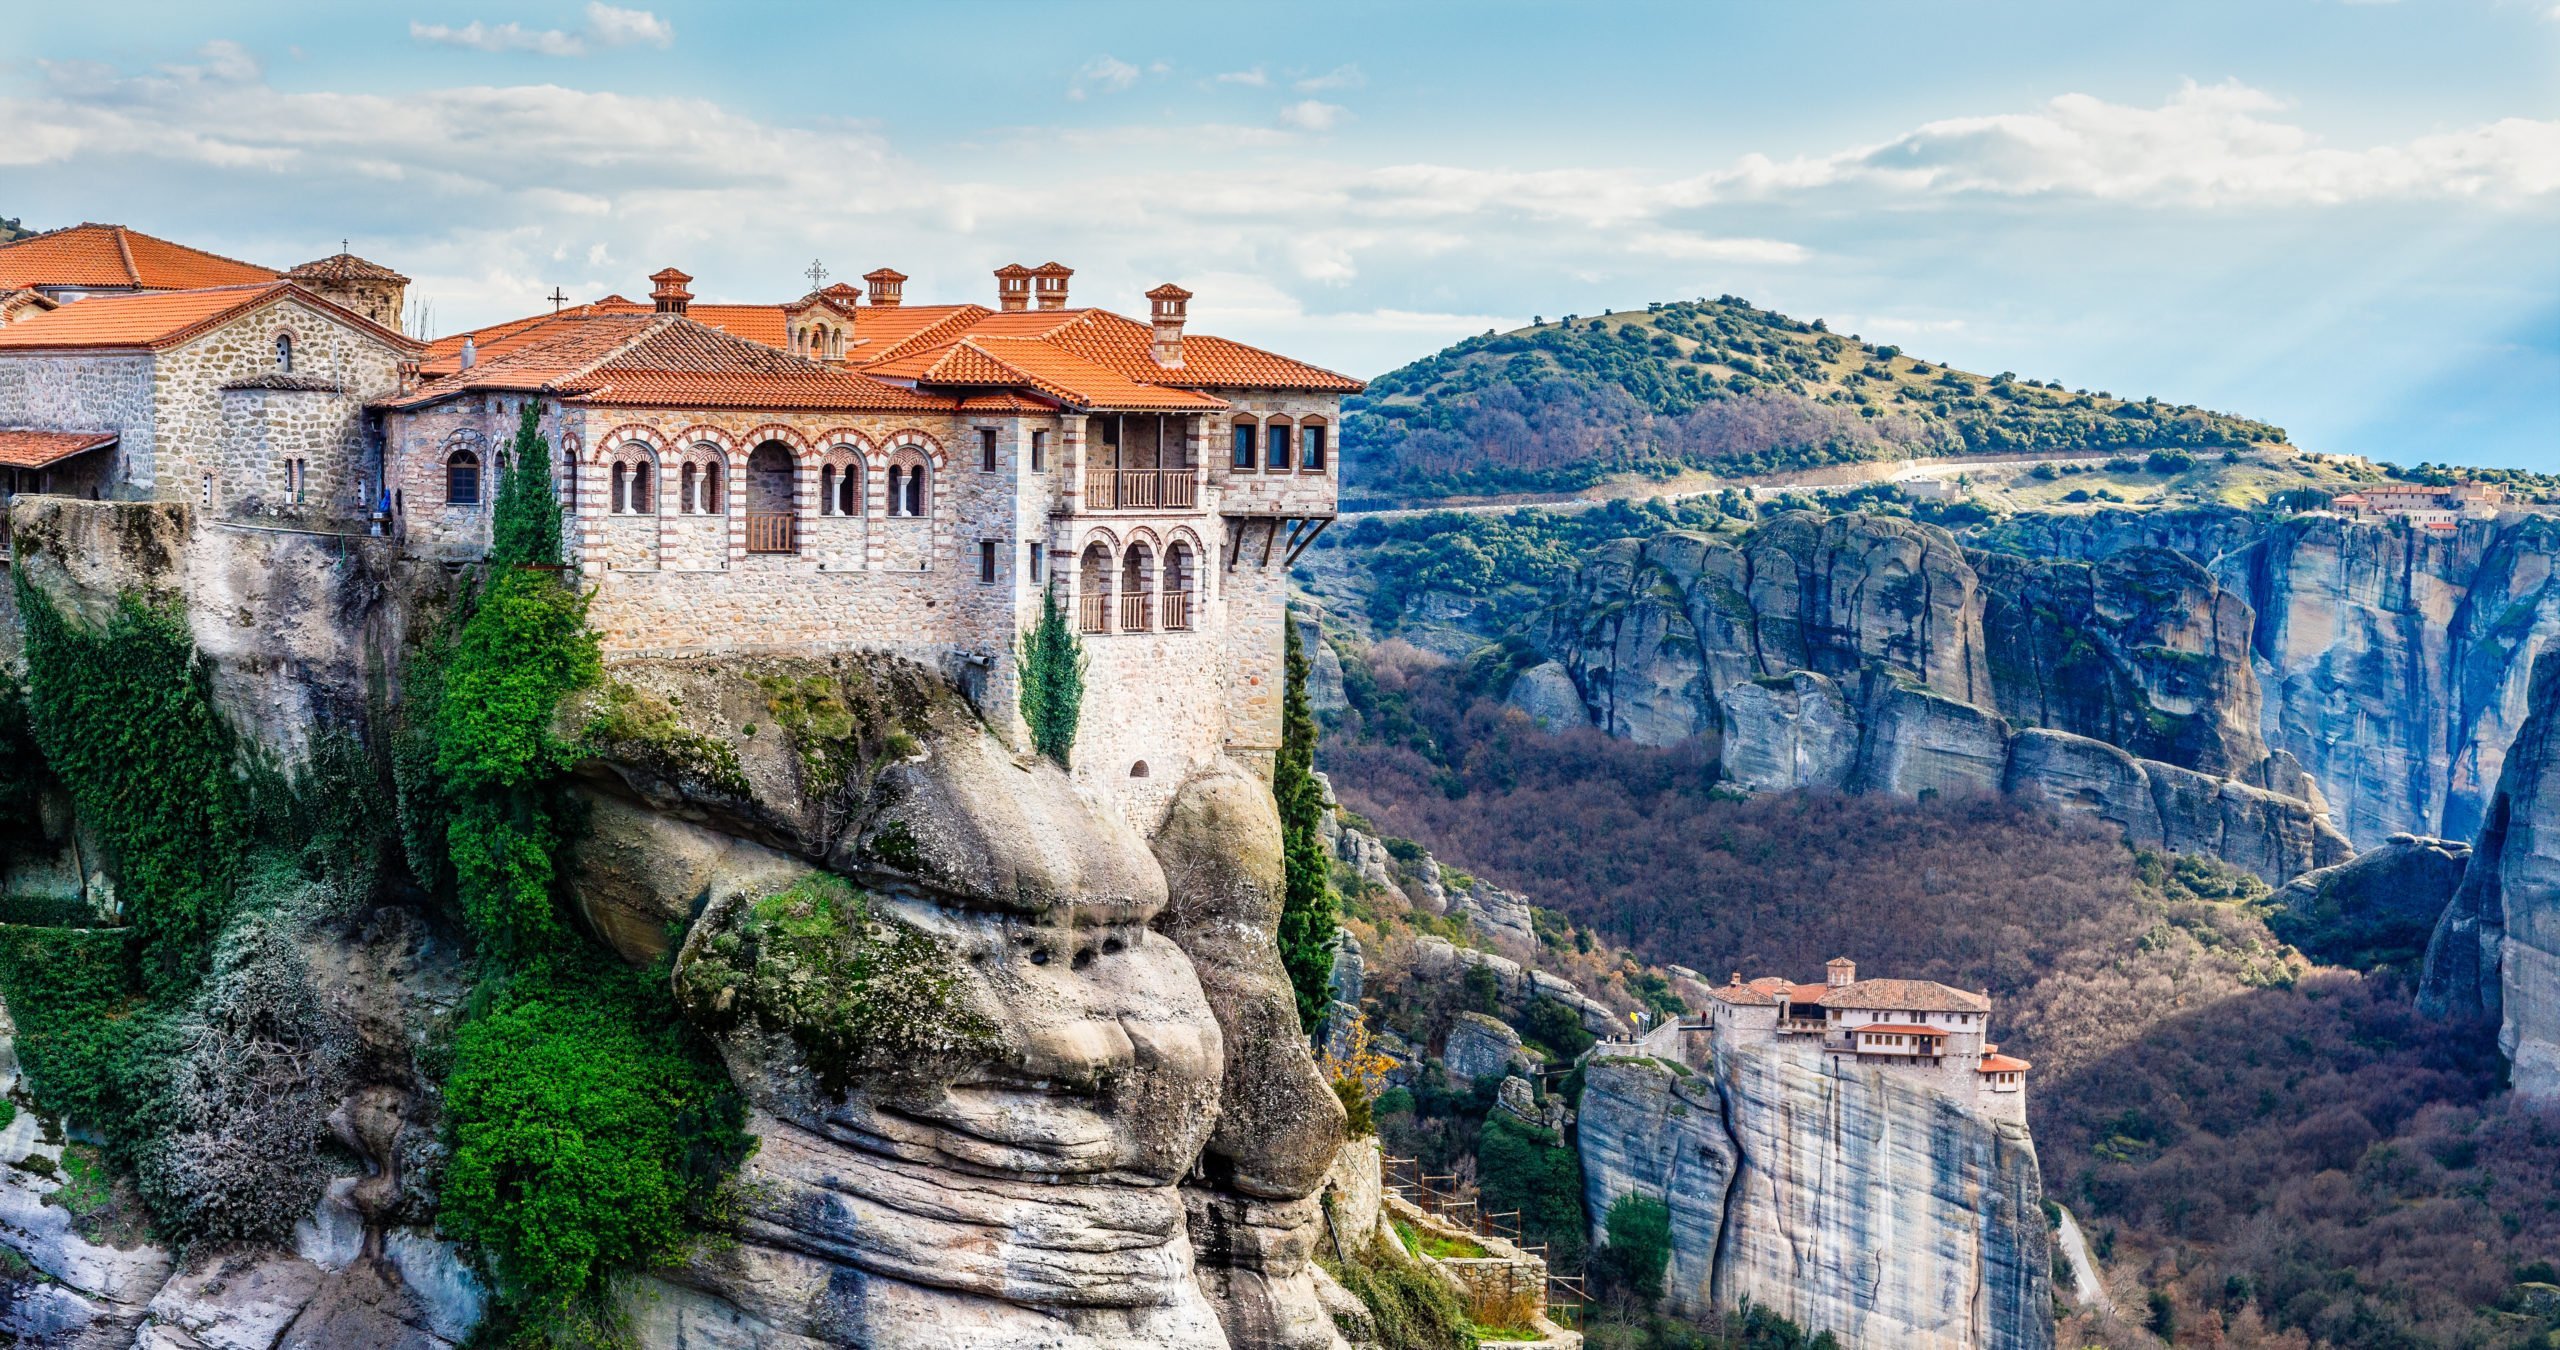 See All The Monasteries Such As The Varlaam Monastery On Your Meteora Half Day Tour From Kalampaka Train Station (1)